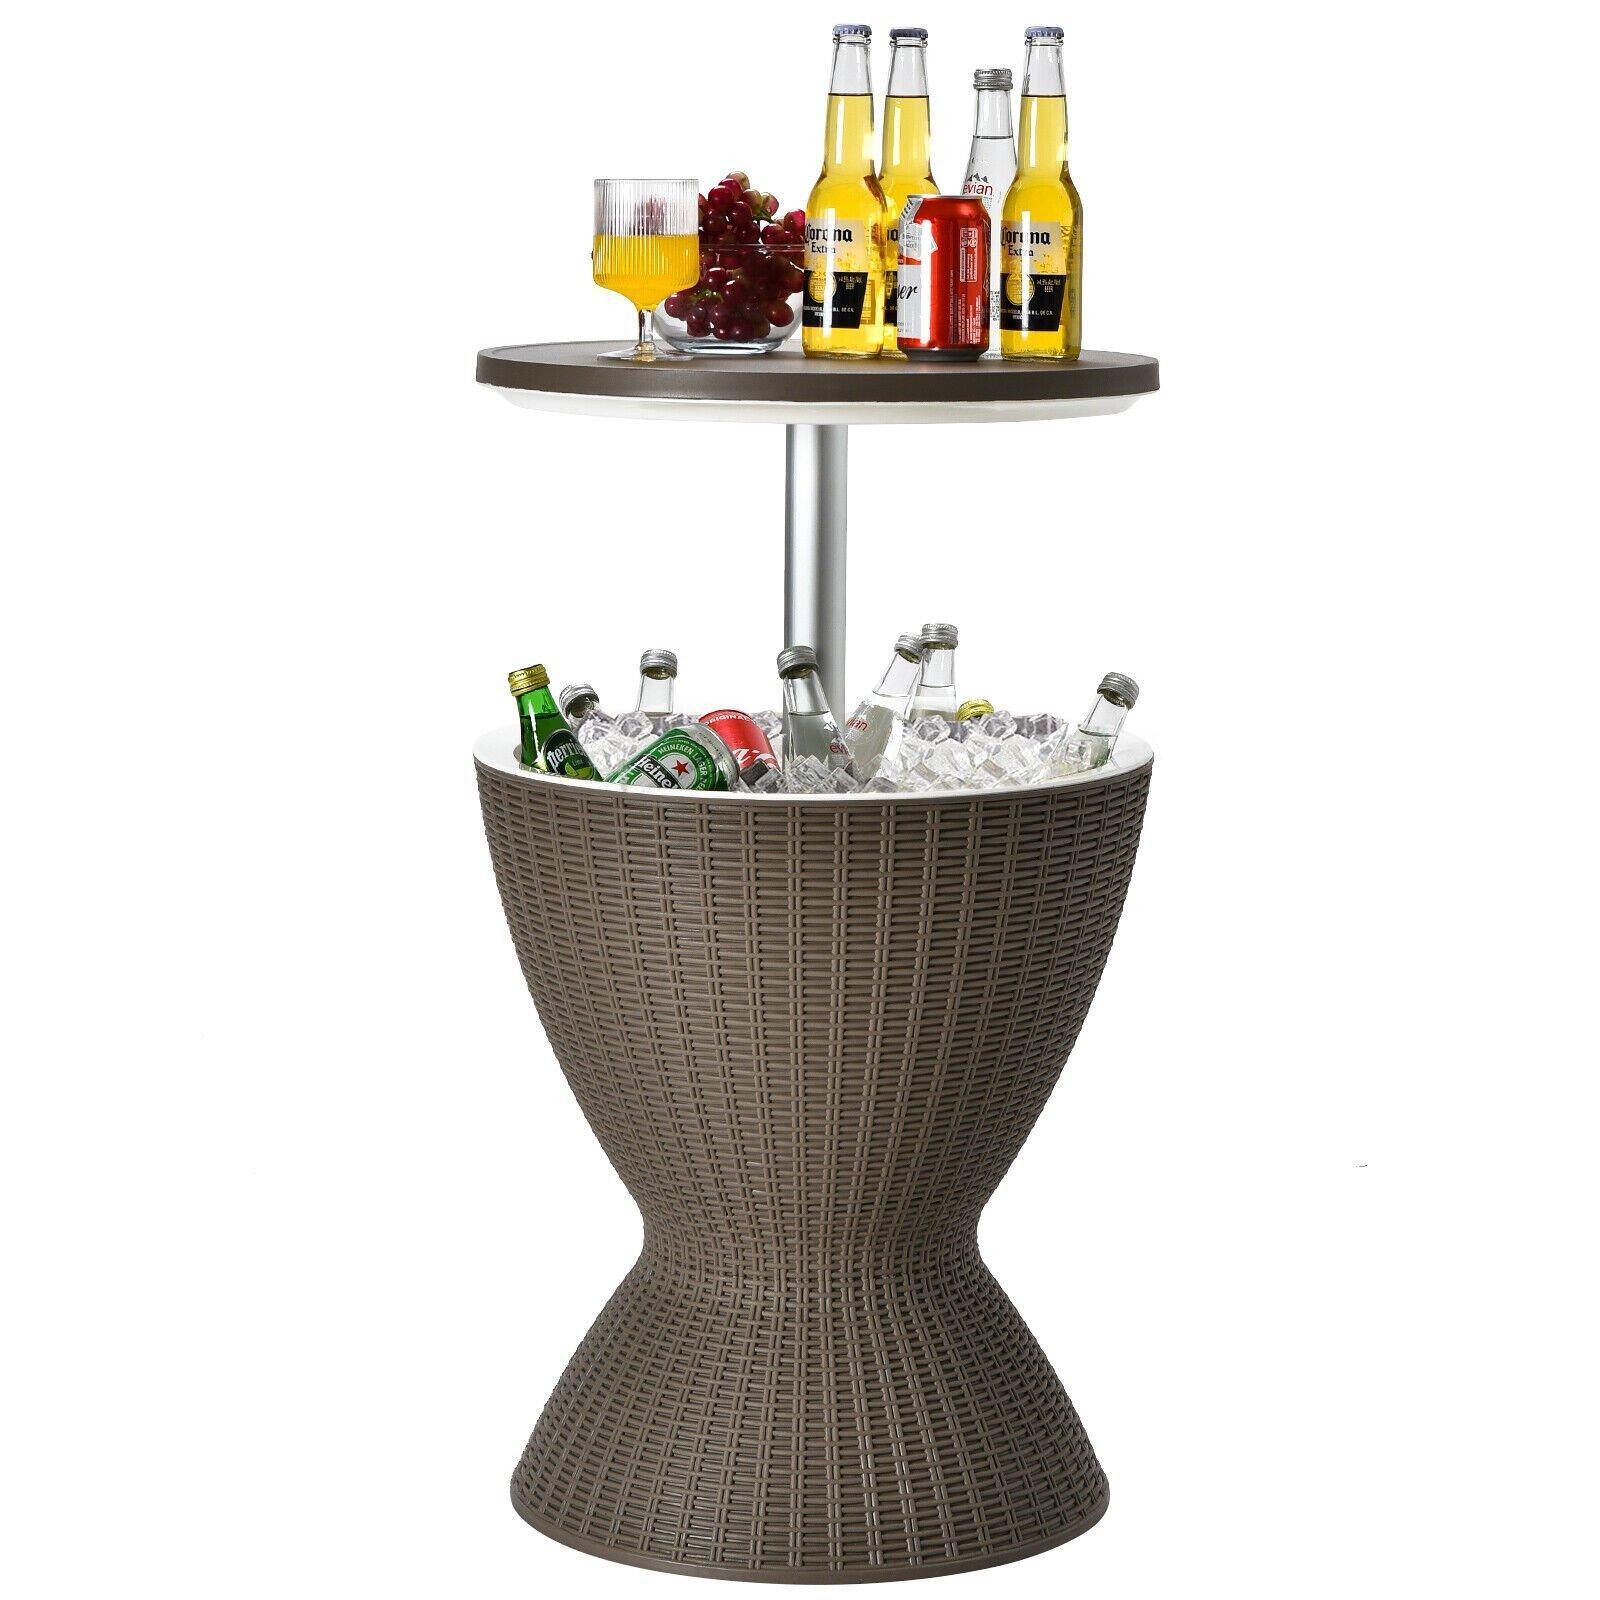 30L Patio Ice Cooler Outdoor All-weather Cool Bar Table w/ Extendable Tabletop - image 1